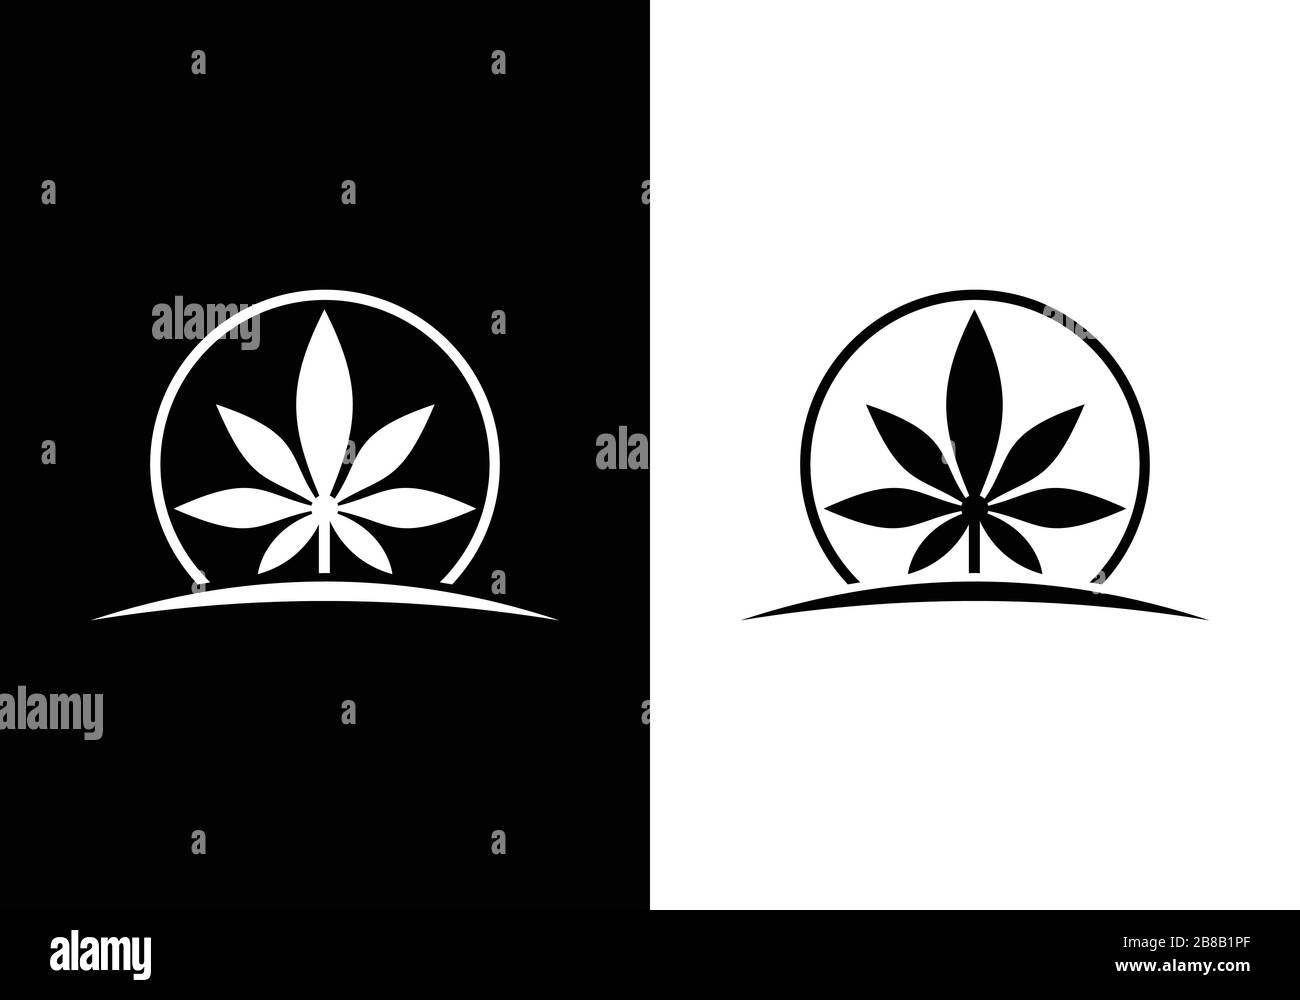 cannabis leaf logo vector icon on black and white background Stock Vector